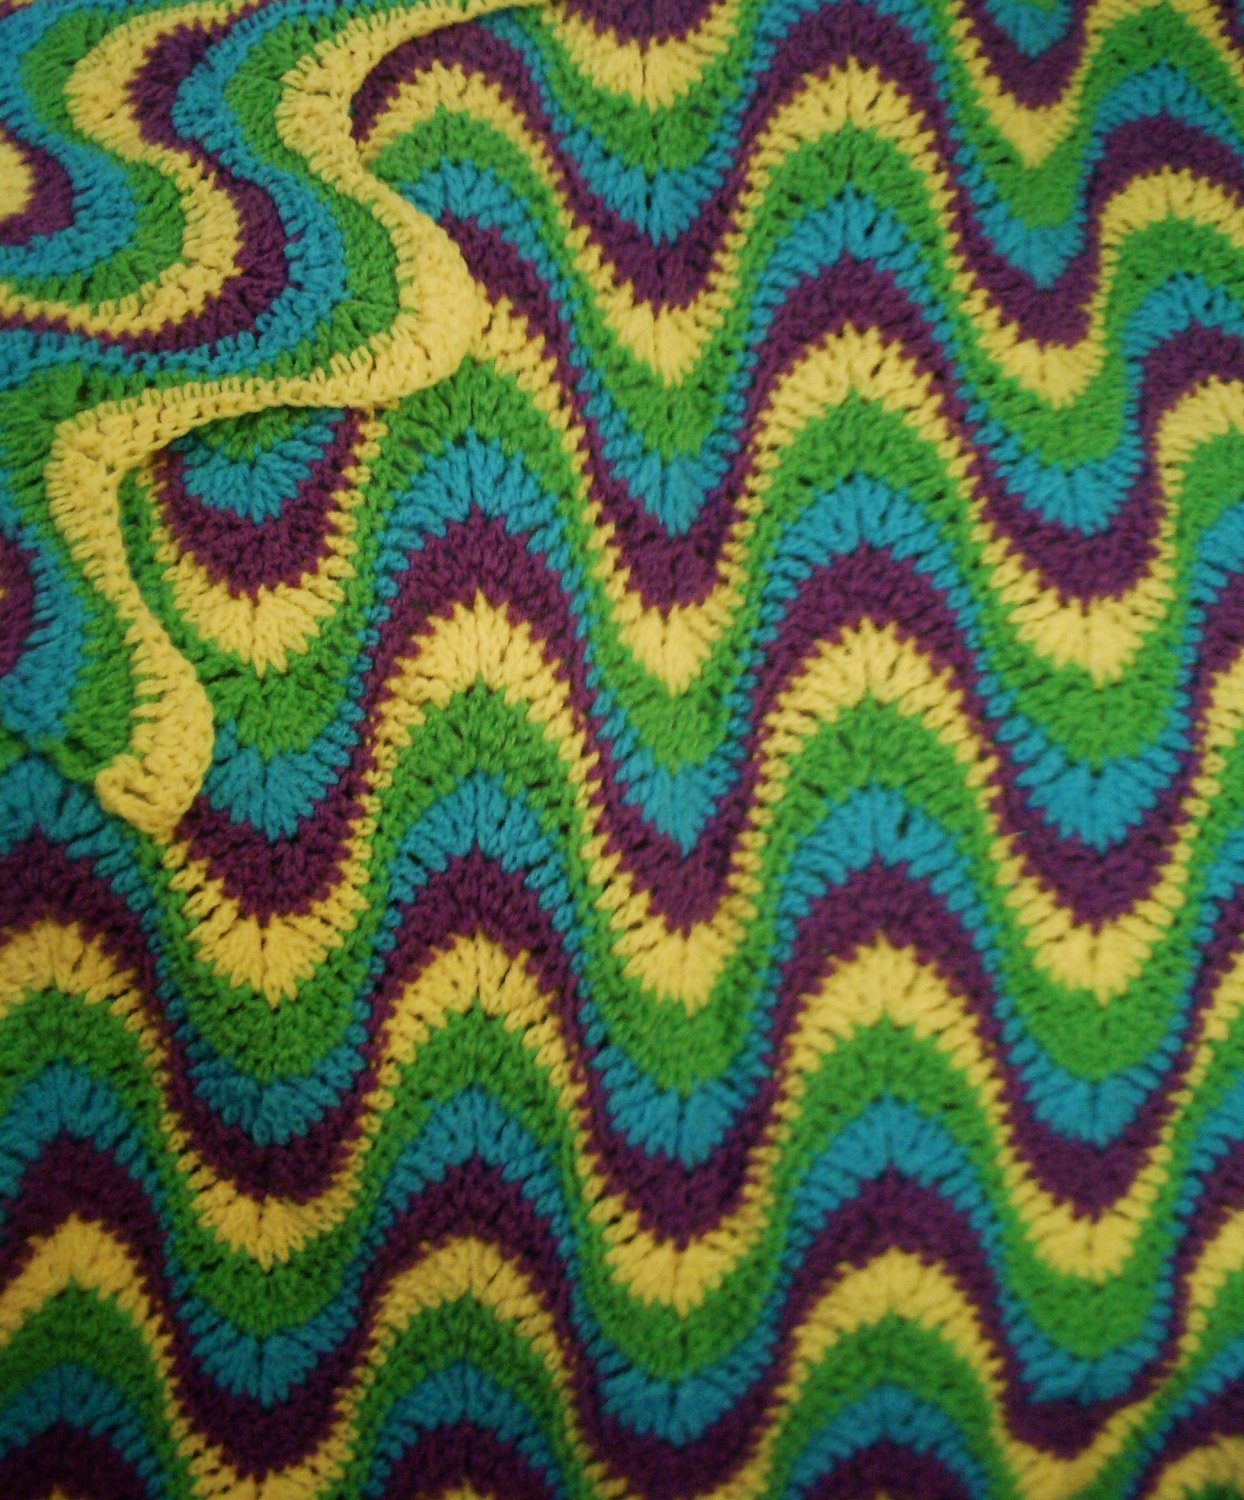 Afghan Crochet Pattern E PDF File For Multi-Colored, Exaggerated Ripple